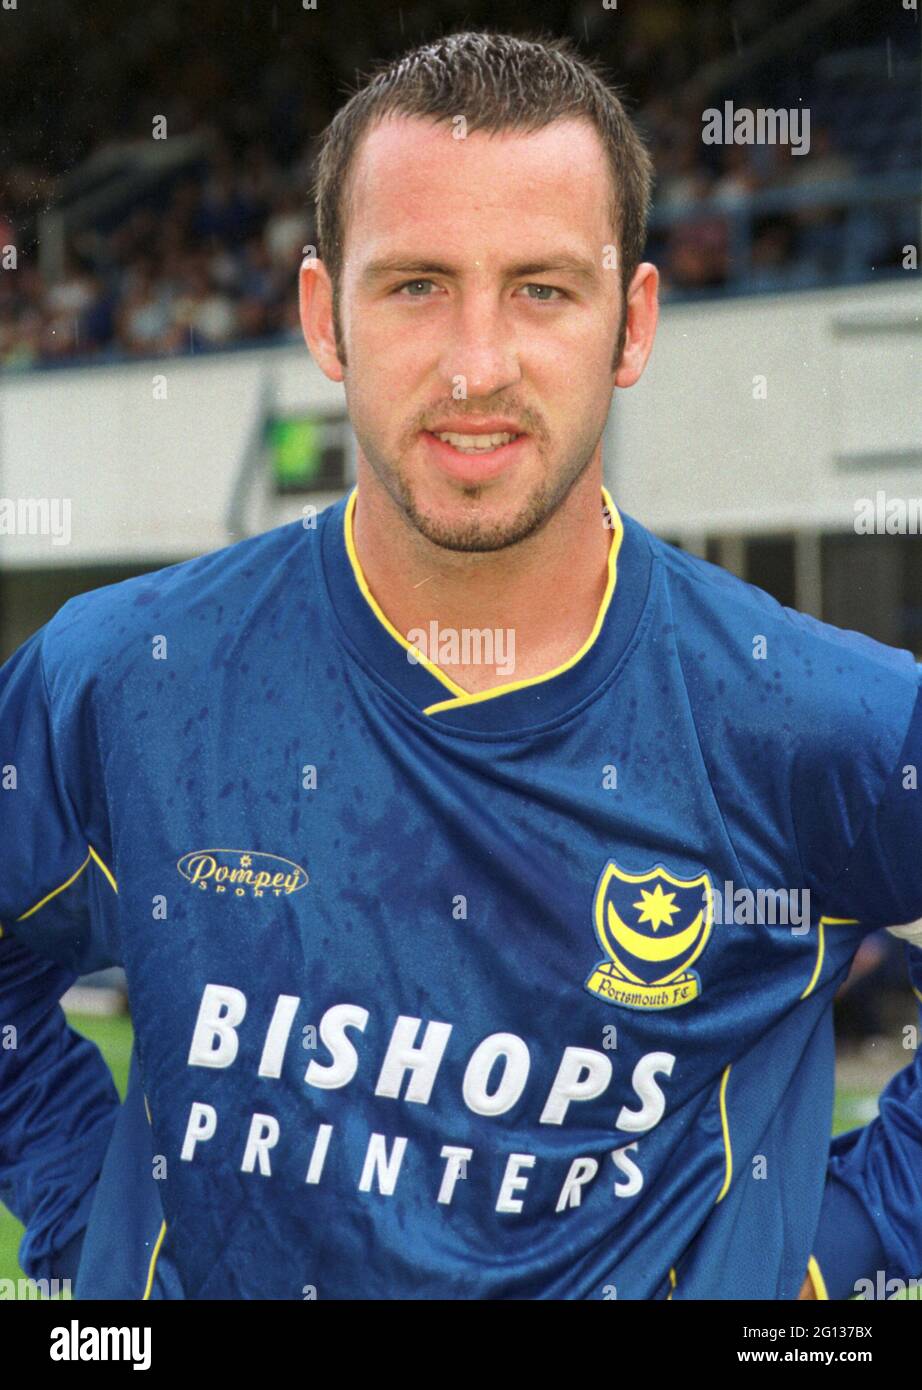 PORTSMOUTH V COVENTRY 29/07/2000 SHAUN DERRY PIC MIKE WALKER 2000 Foto Stock